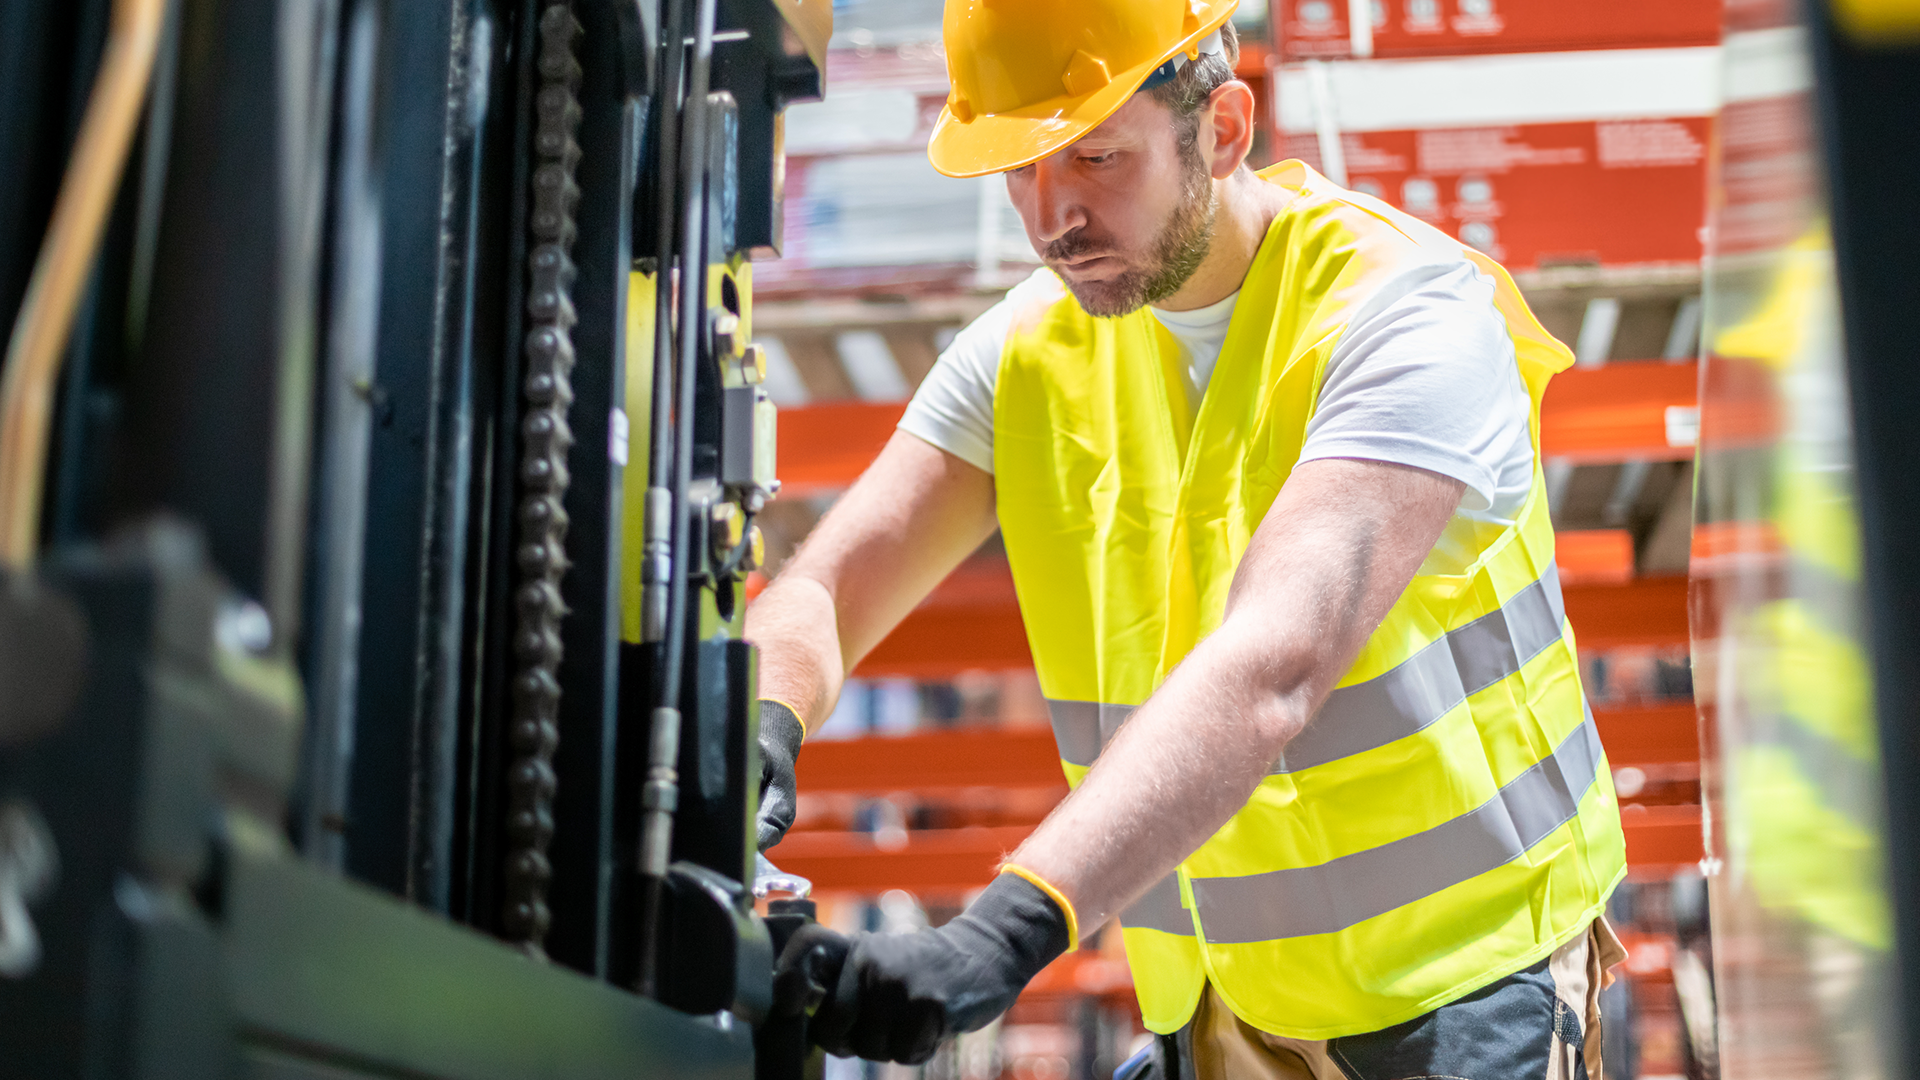 Top 5 Forklift Operator Habits That Need to Go